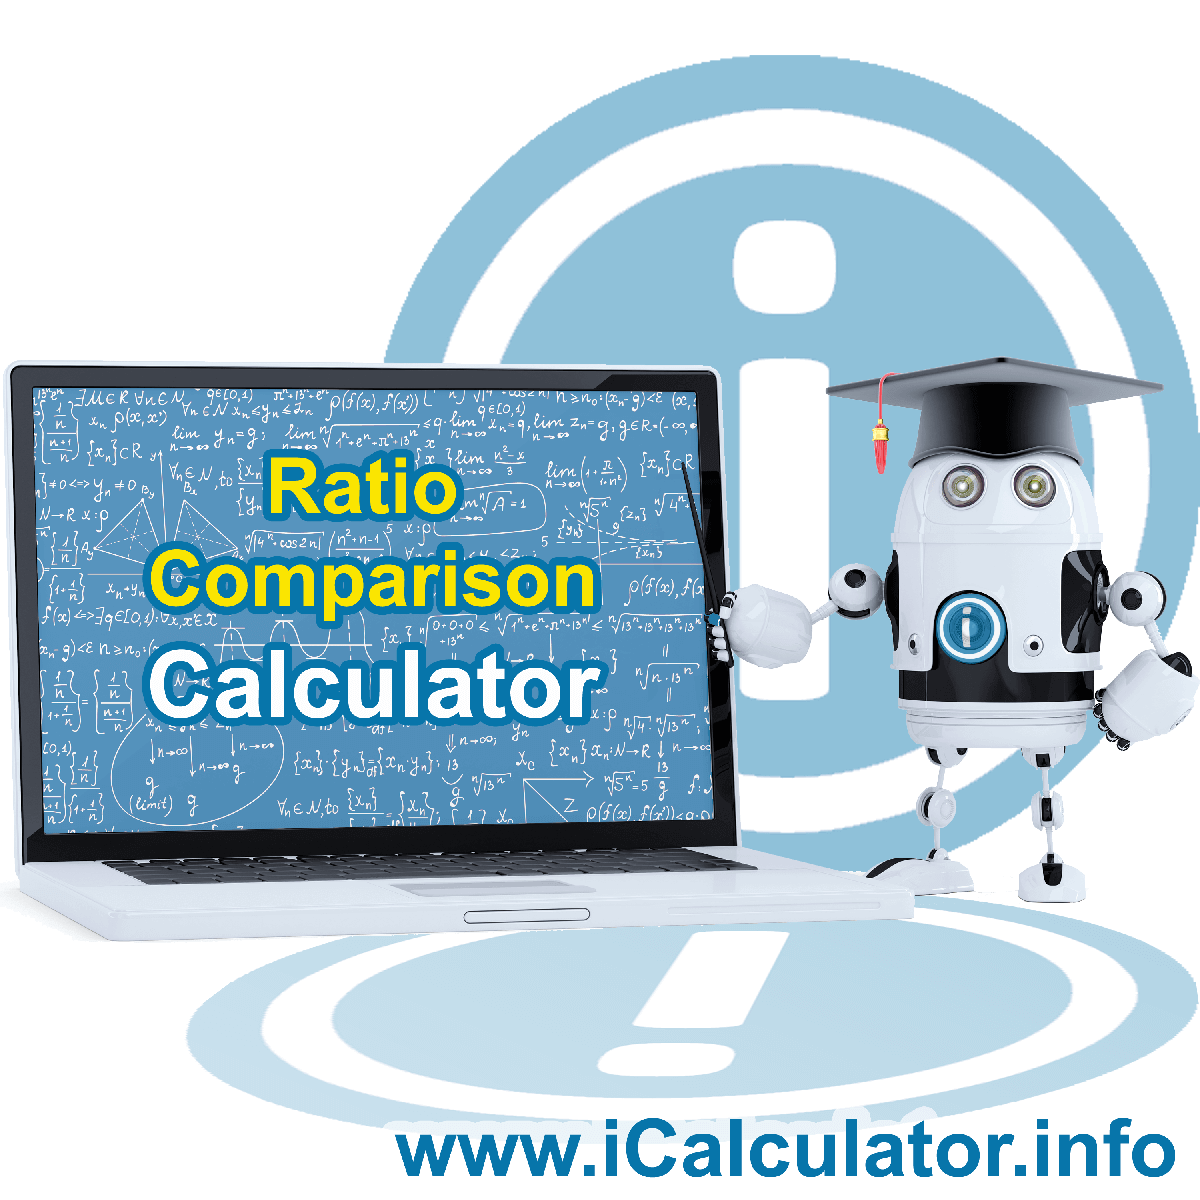 The Ratio Comparison Calculator by iCalculator is a good calculator for comparing up to 50 different ratios in just a few seconds with a good online calculator with supporting ratio formula and information